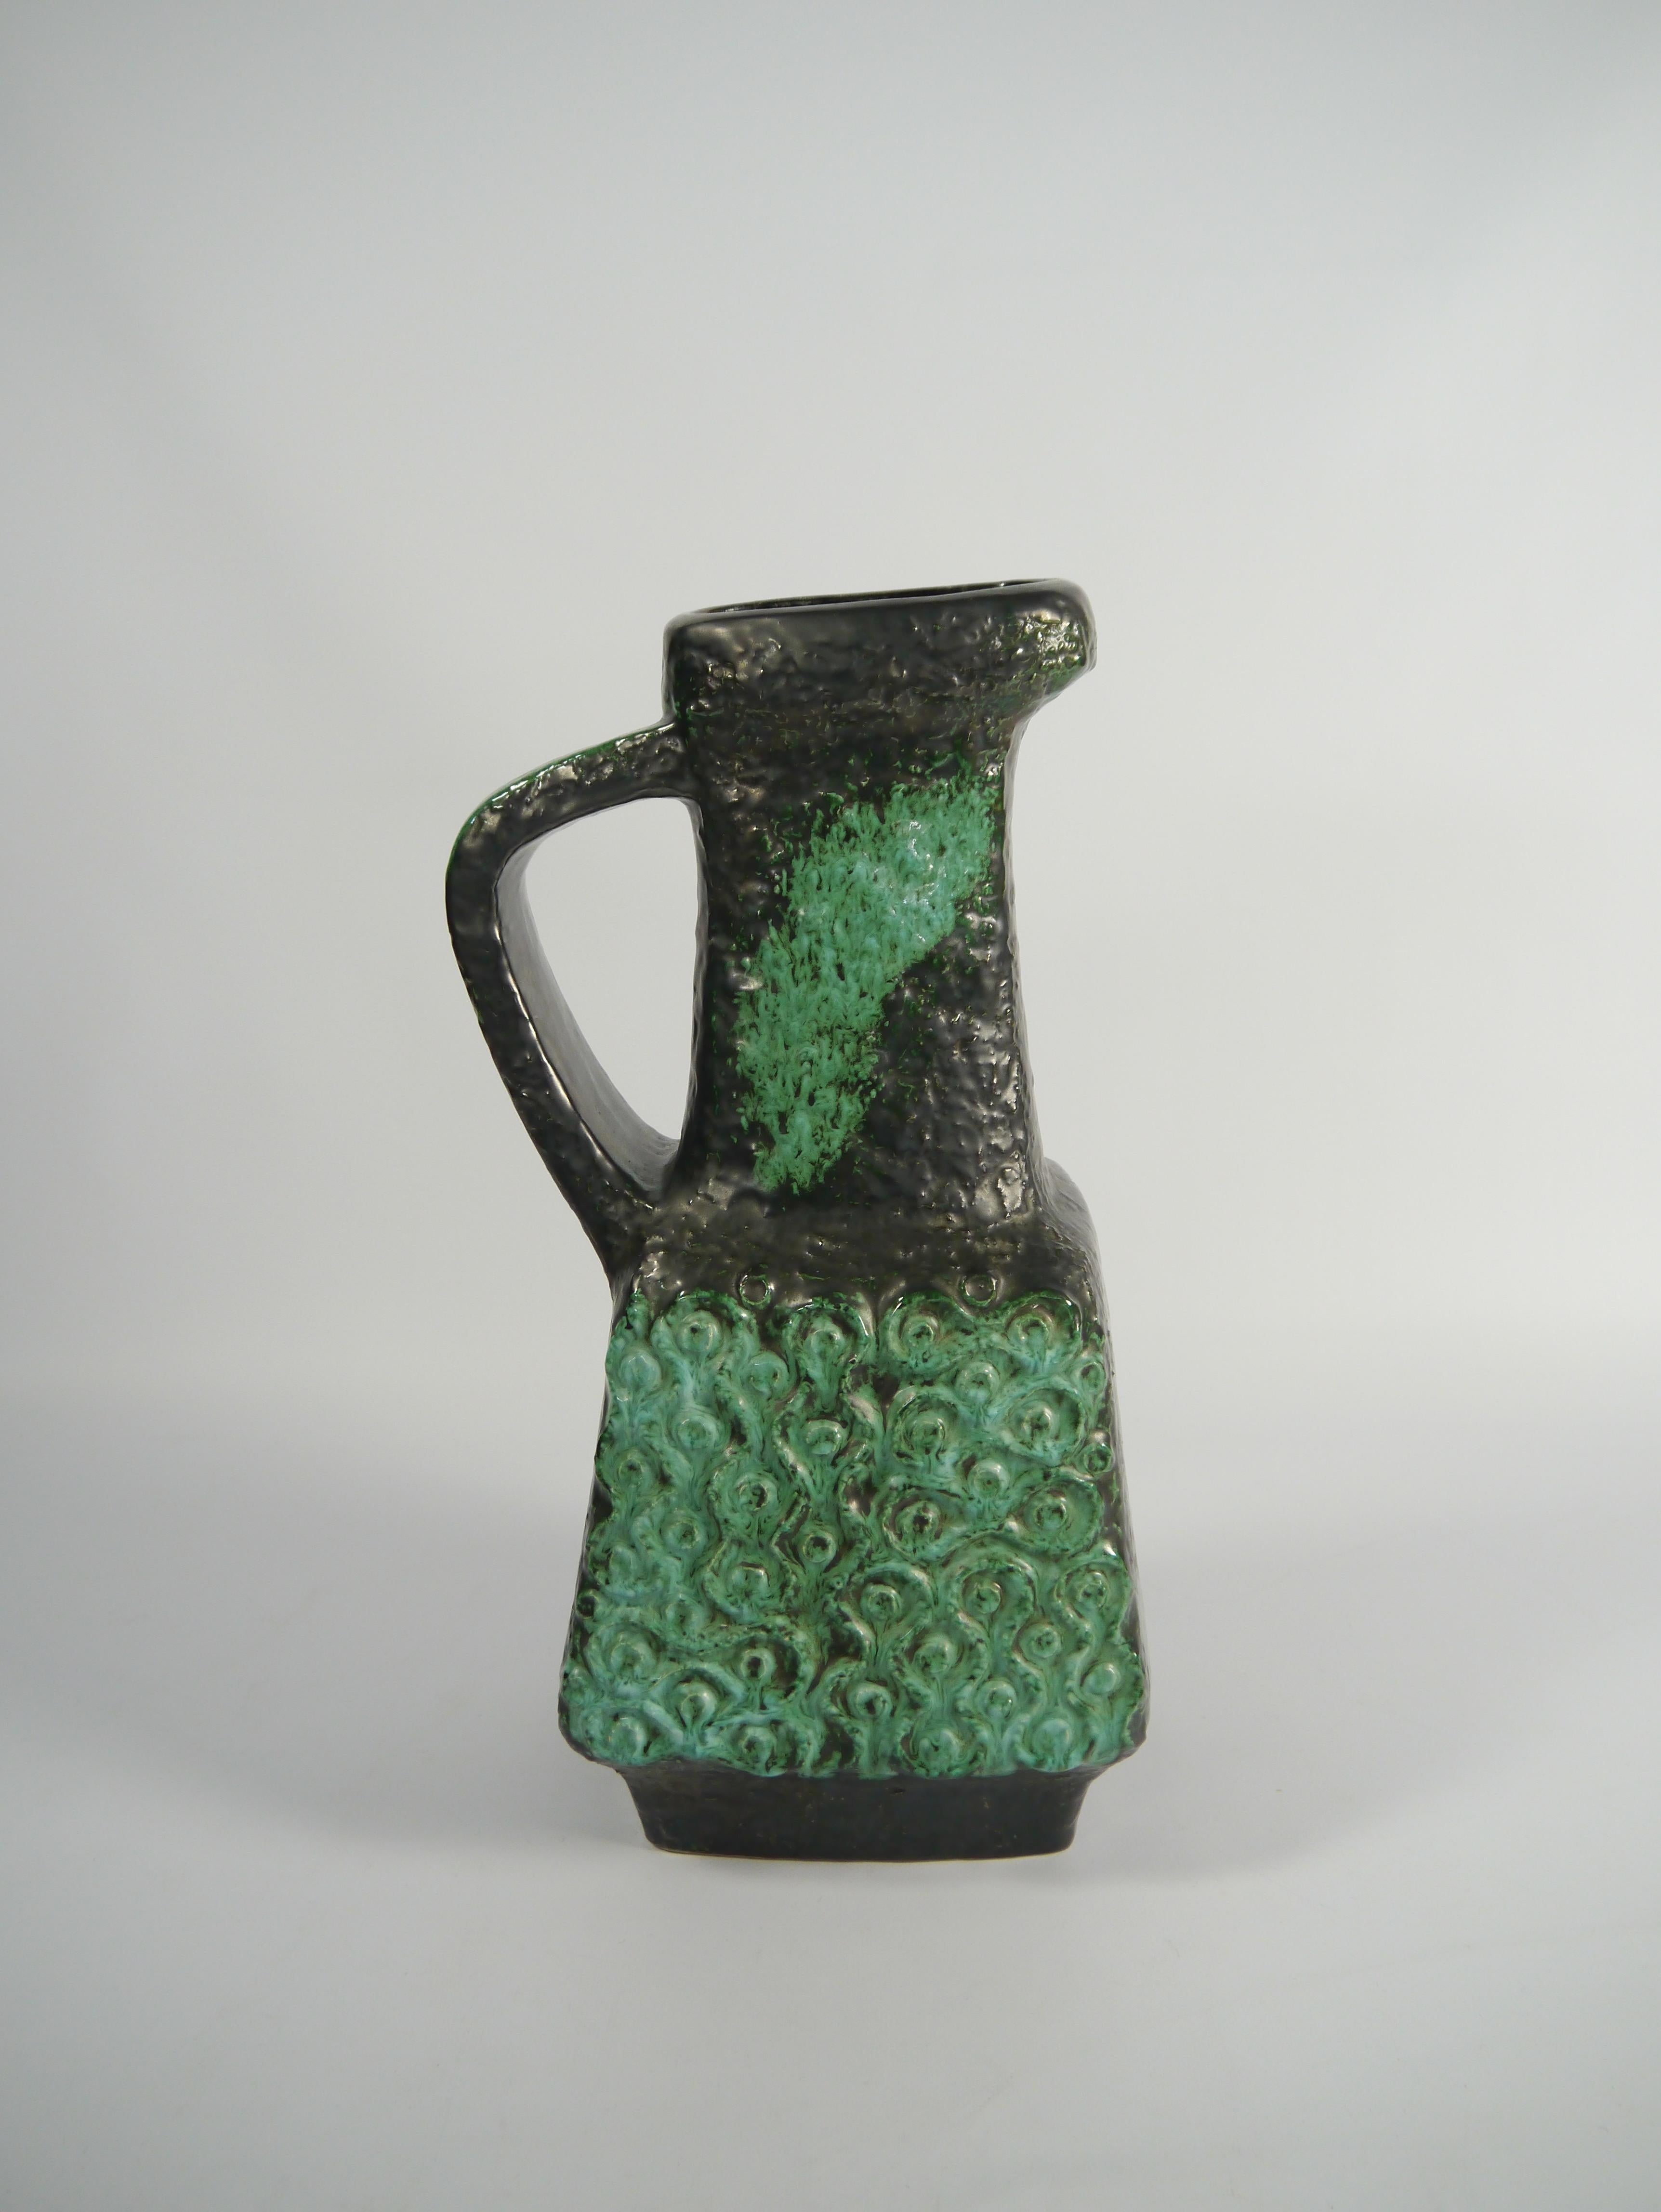 Tall brutalist style ceramic vase produced by BAY in the 1970s. Clean and straight symmetrical shape with graffiti-like green pattern, indeed conversation piece material.